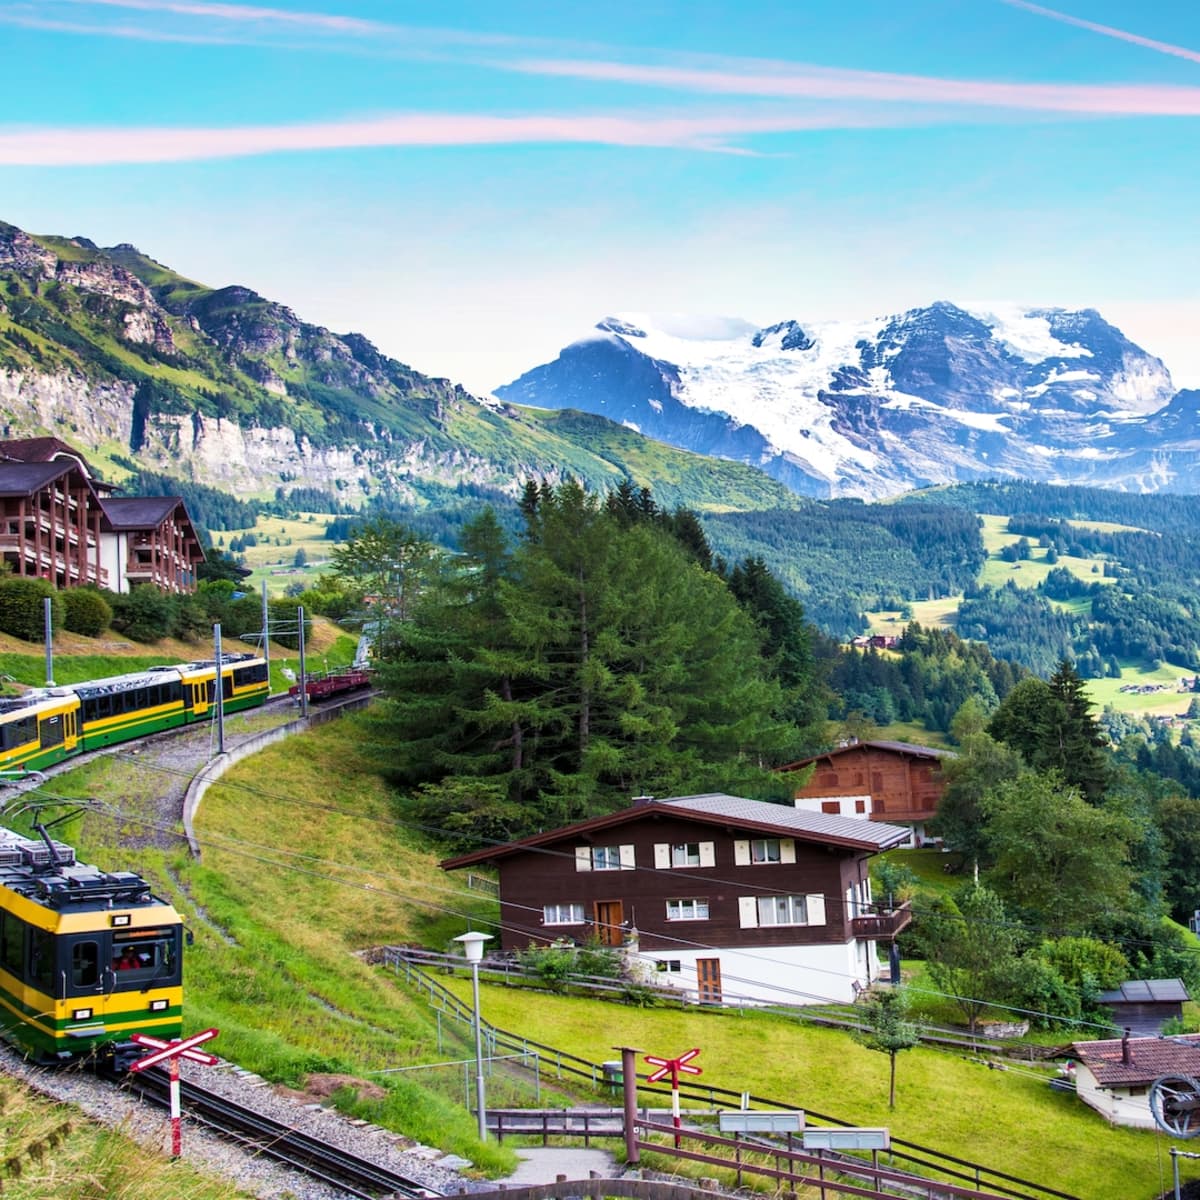 Switzerland Offering Families $90K to Move to Tiny Village in